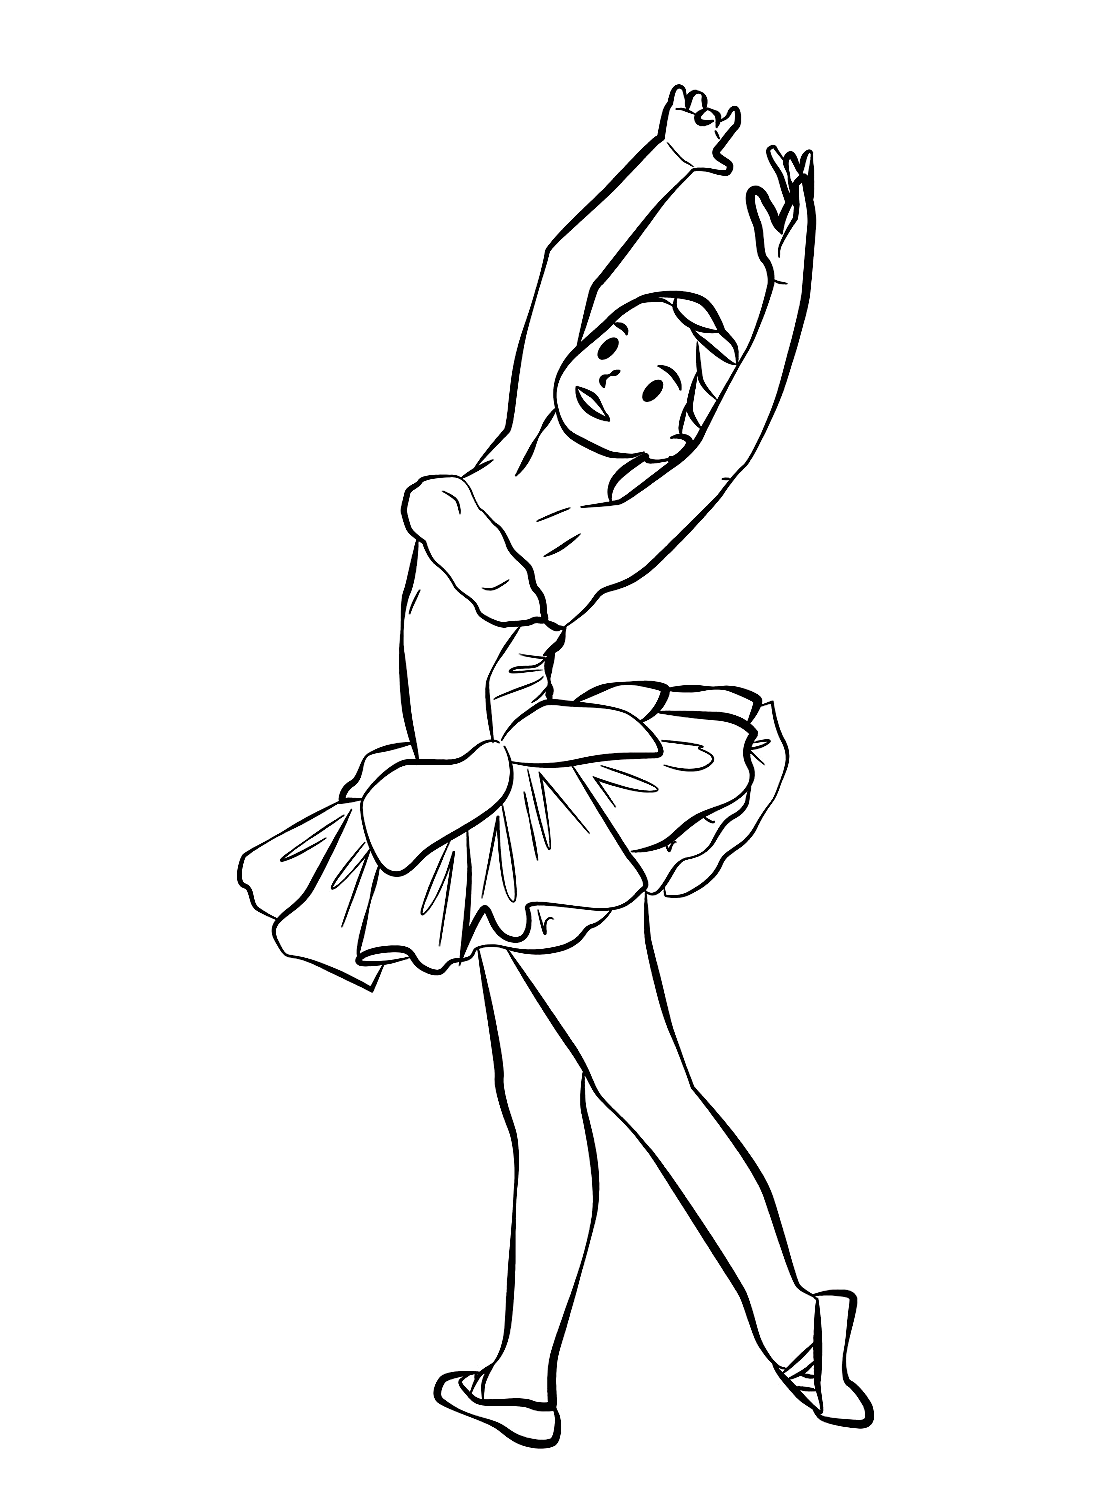 Coloring Page Ballet